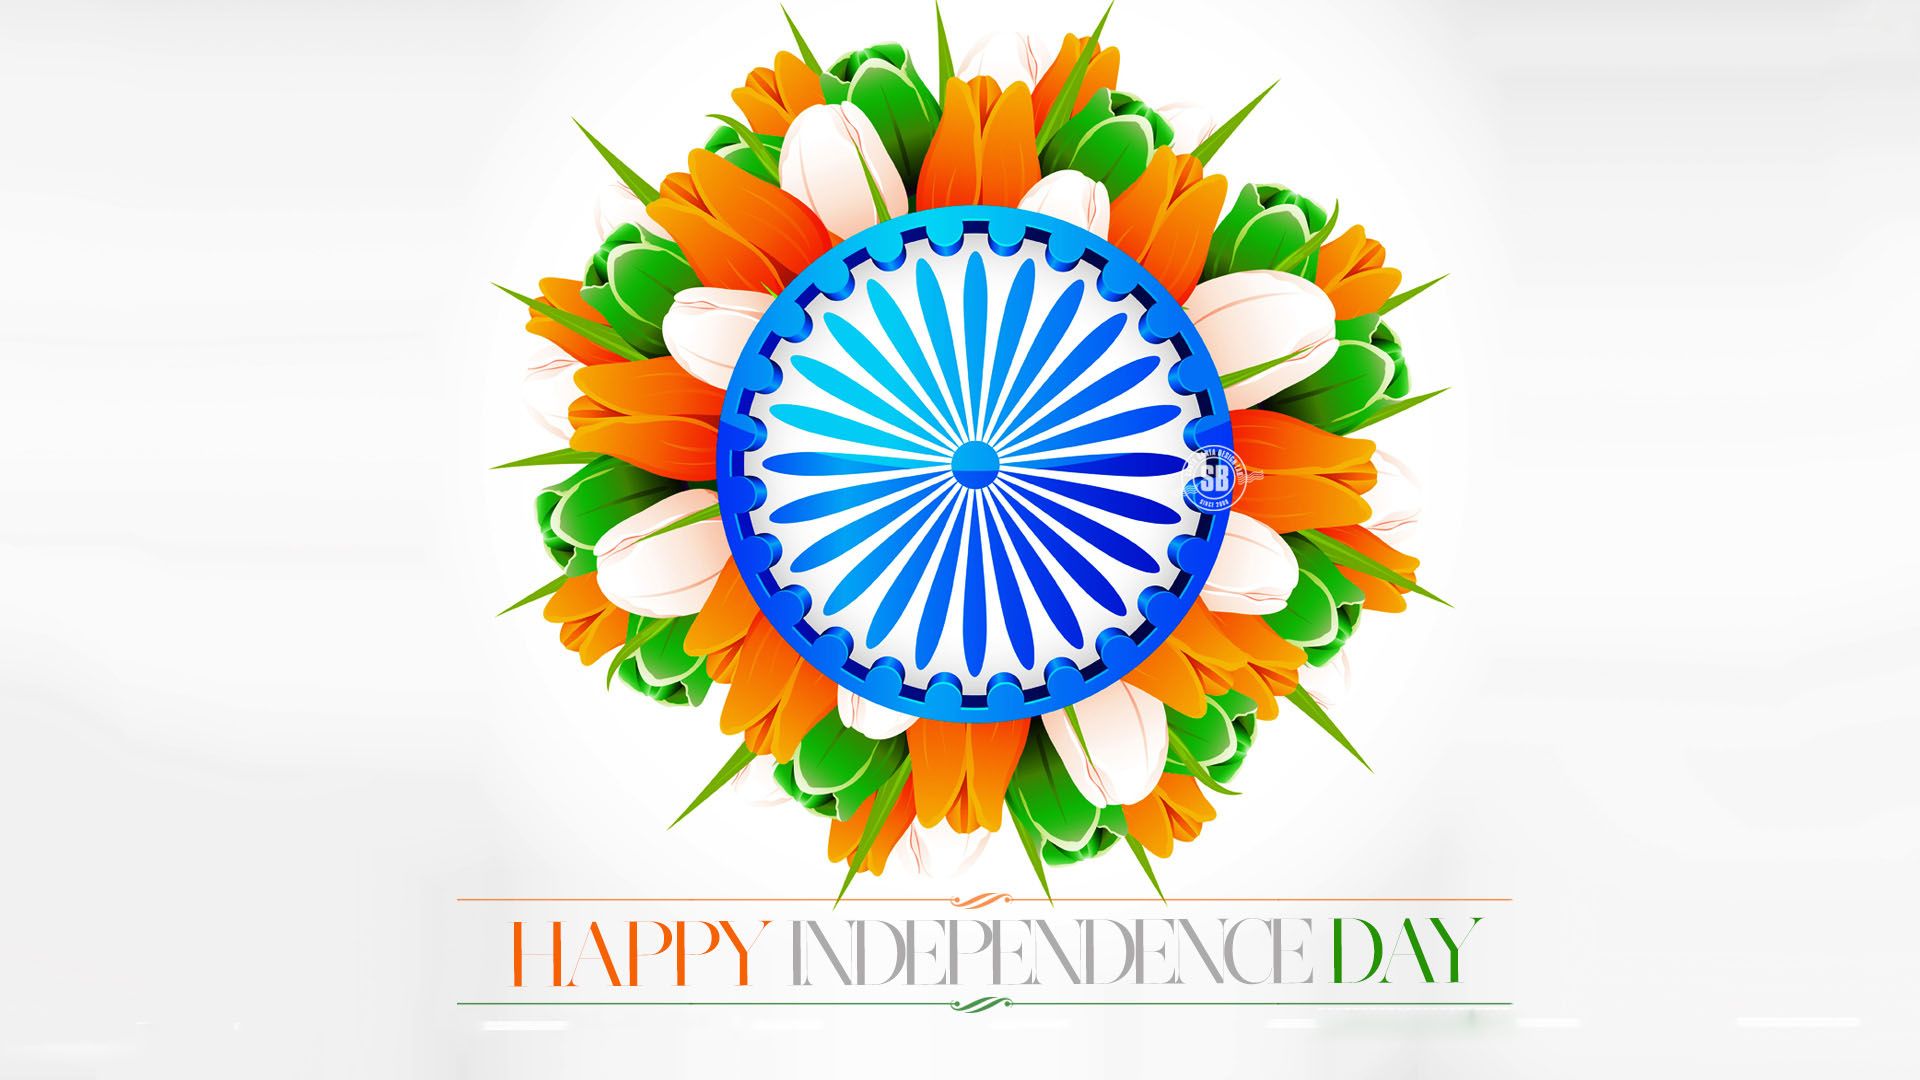 15th August Wallpapers HD Newhdpics Independence day wallpaper